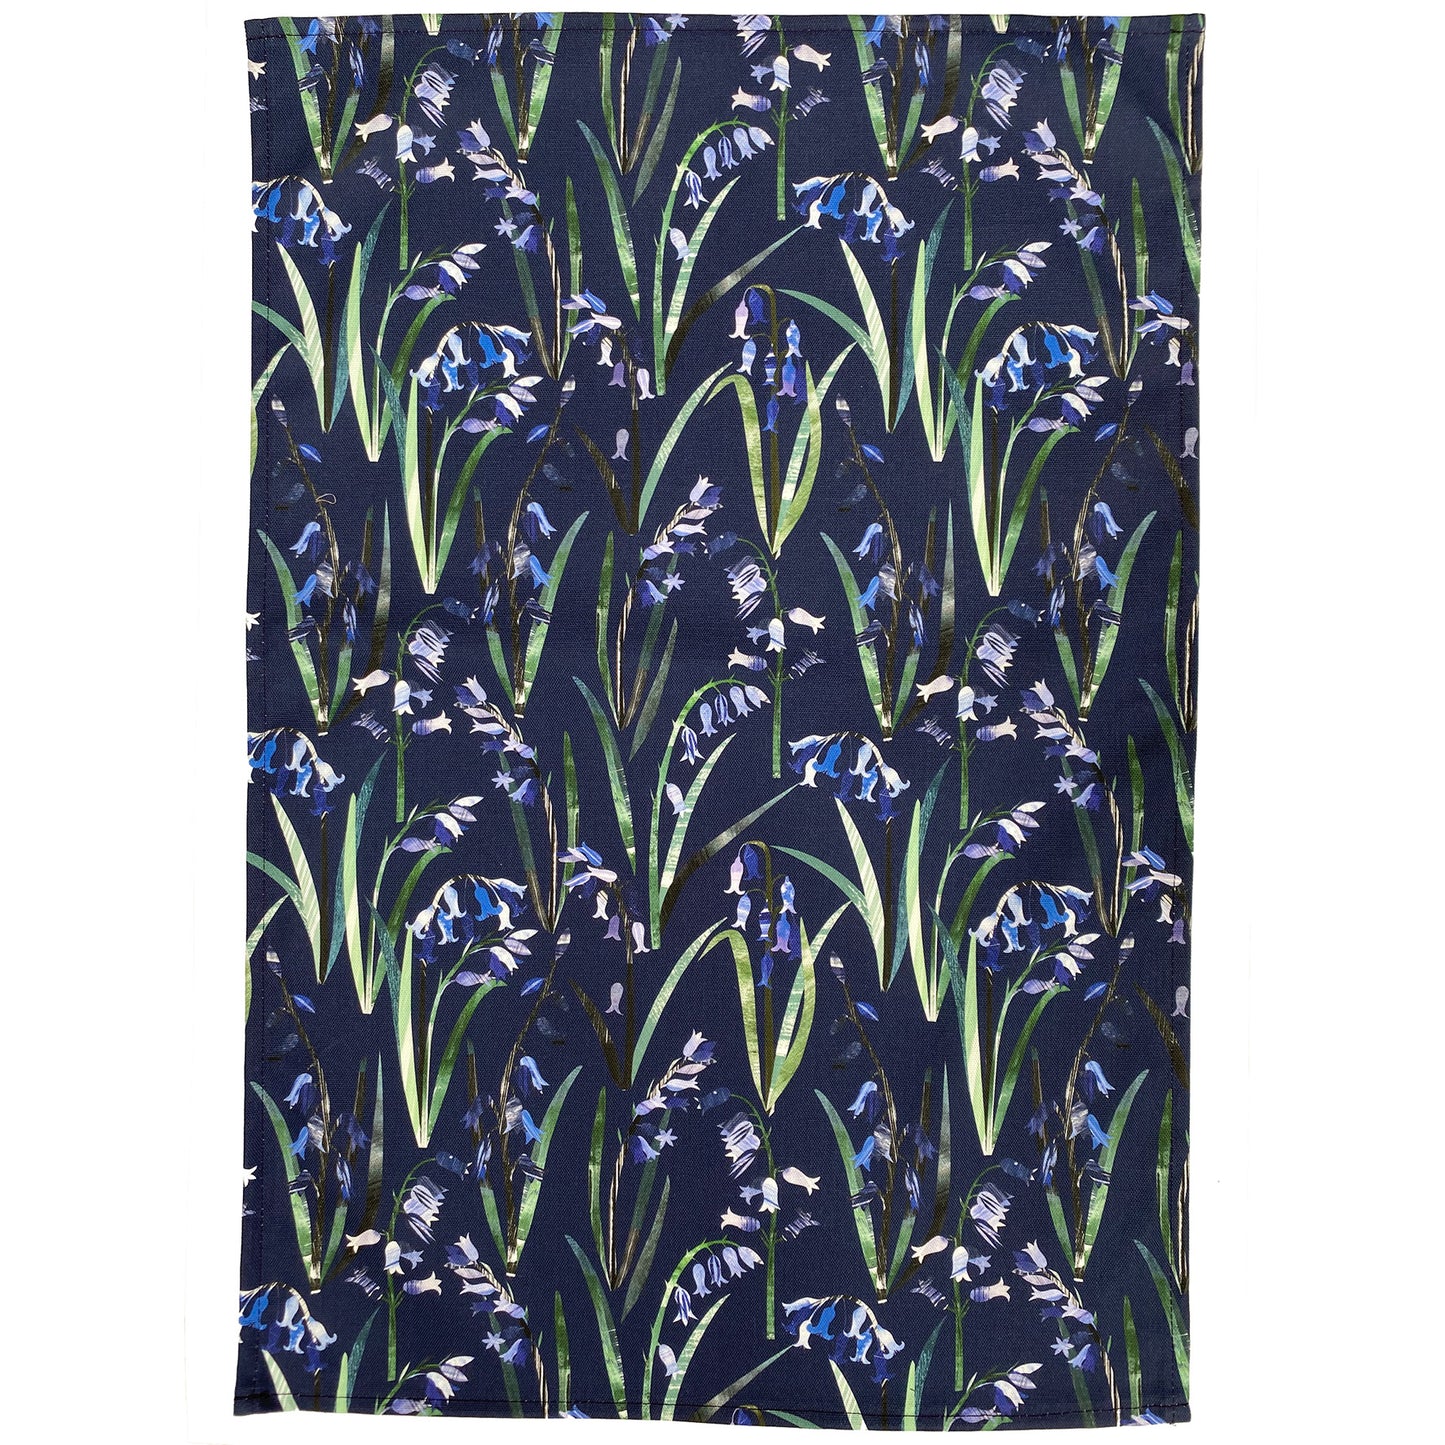 An opened out navy Blue Bluebell Tea Towel on a plain white background.